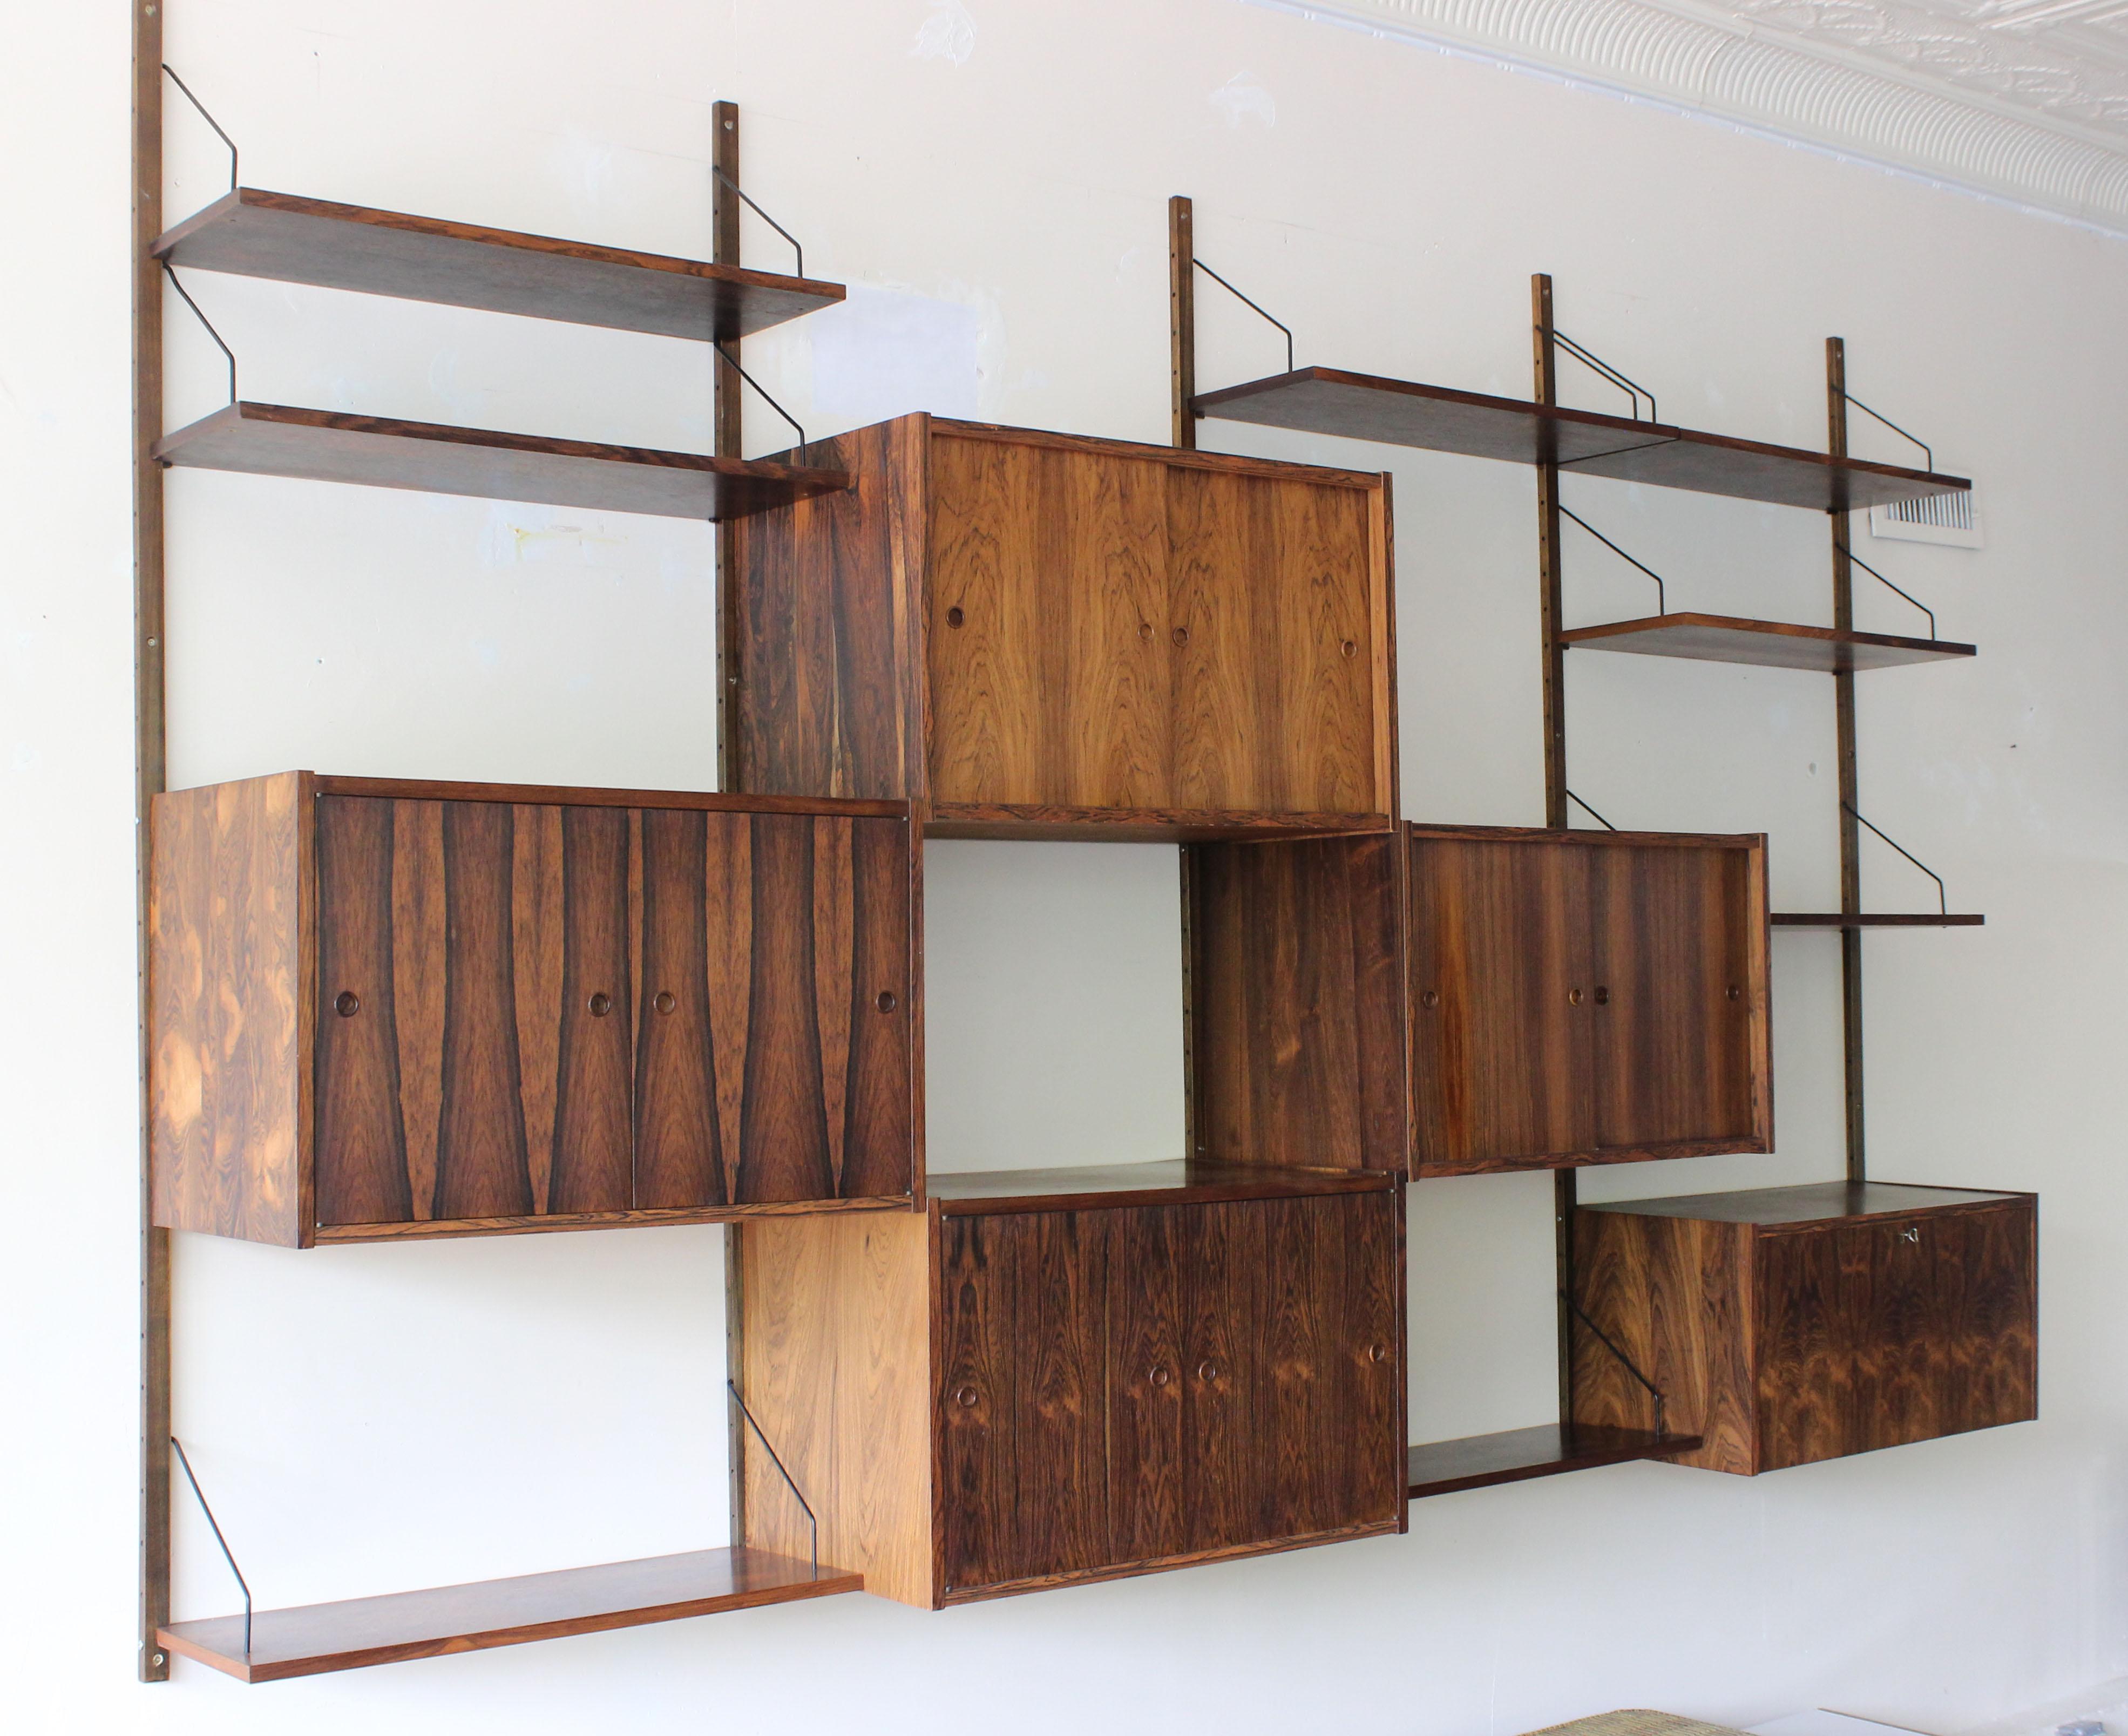 Paul Cadovious Rosewood Wall Unit.
Highly versatile and functional modular wall unit in rosewood by Danish designer Poul Cadovius. This set includes two spring-locked cabinets, two sliding door cabinets with one shelf each, and a locking desk-like